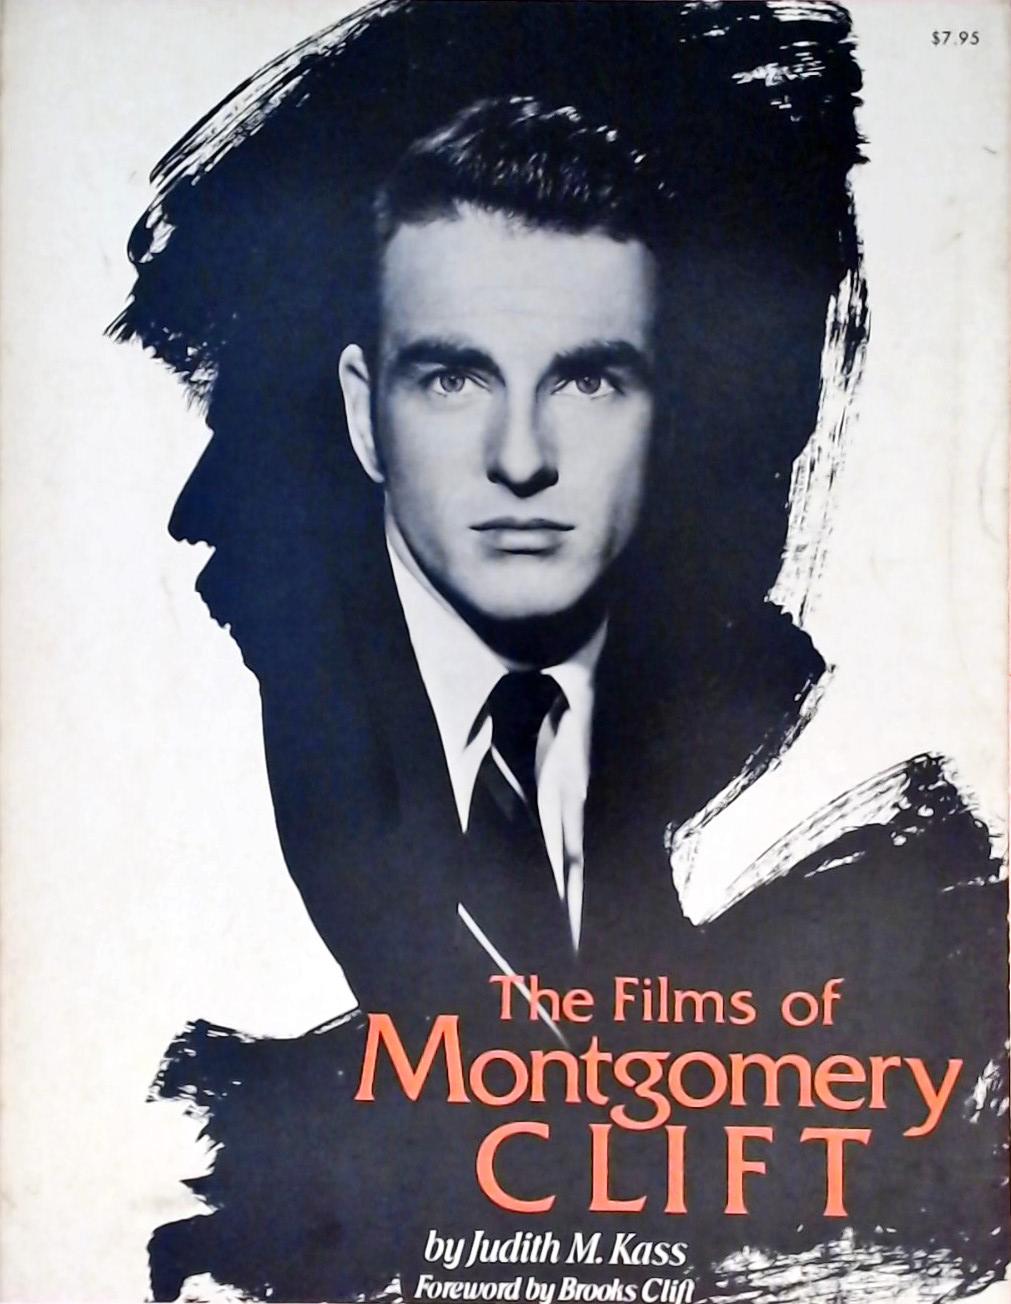 The Films of Montgomery Clift